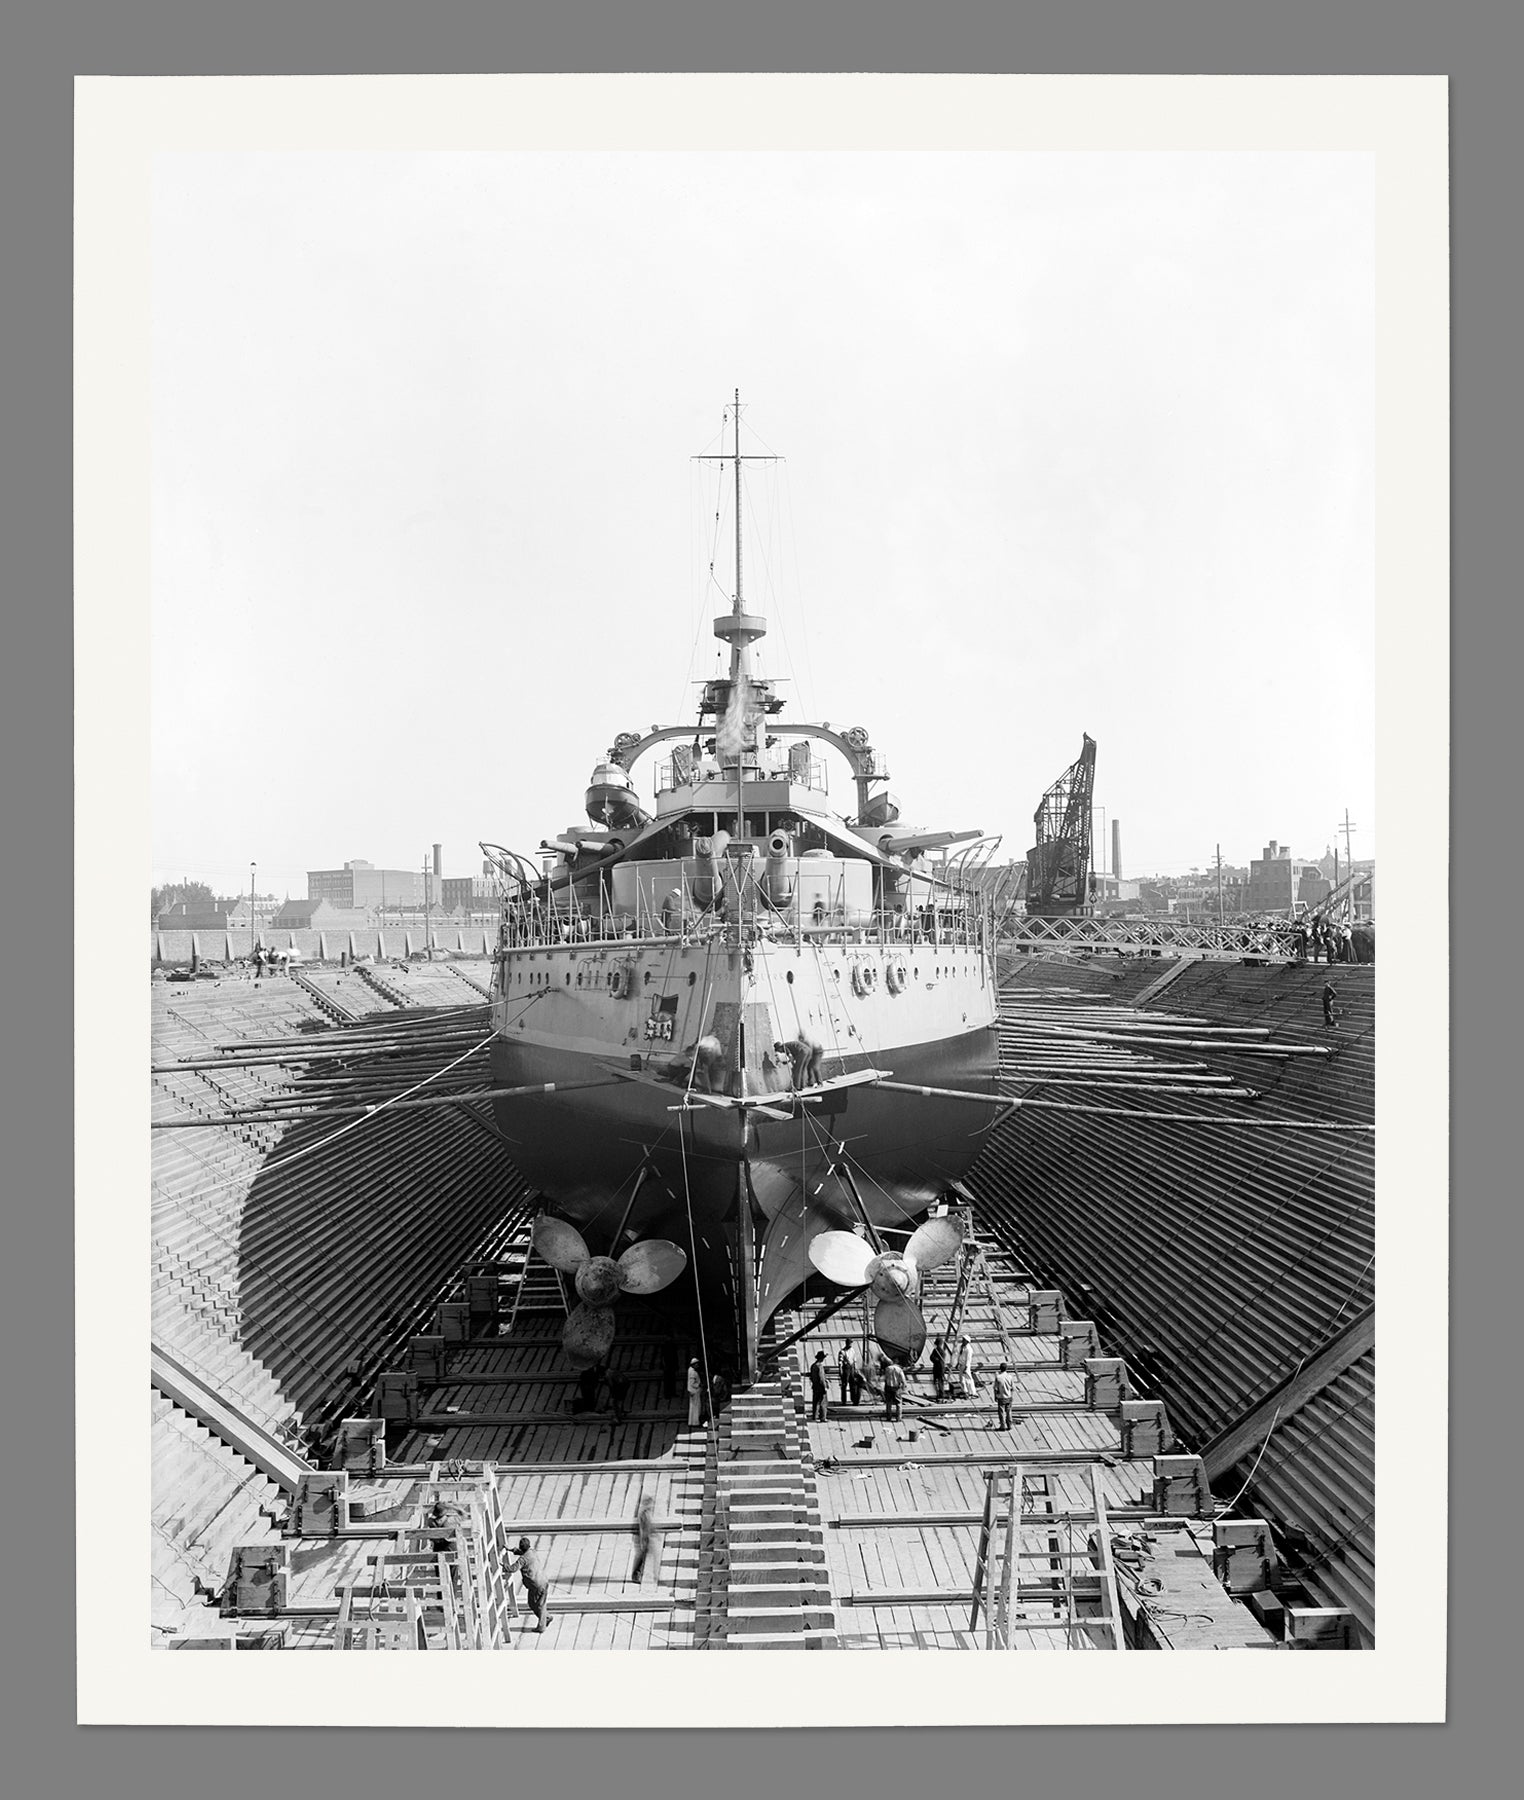 A reproduction print on paper of a vintage photograph of the USS Oregon